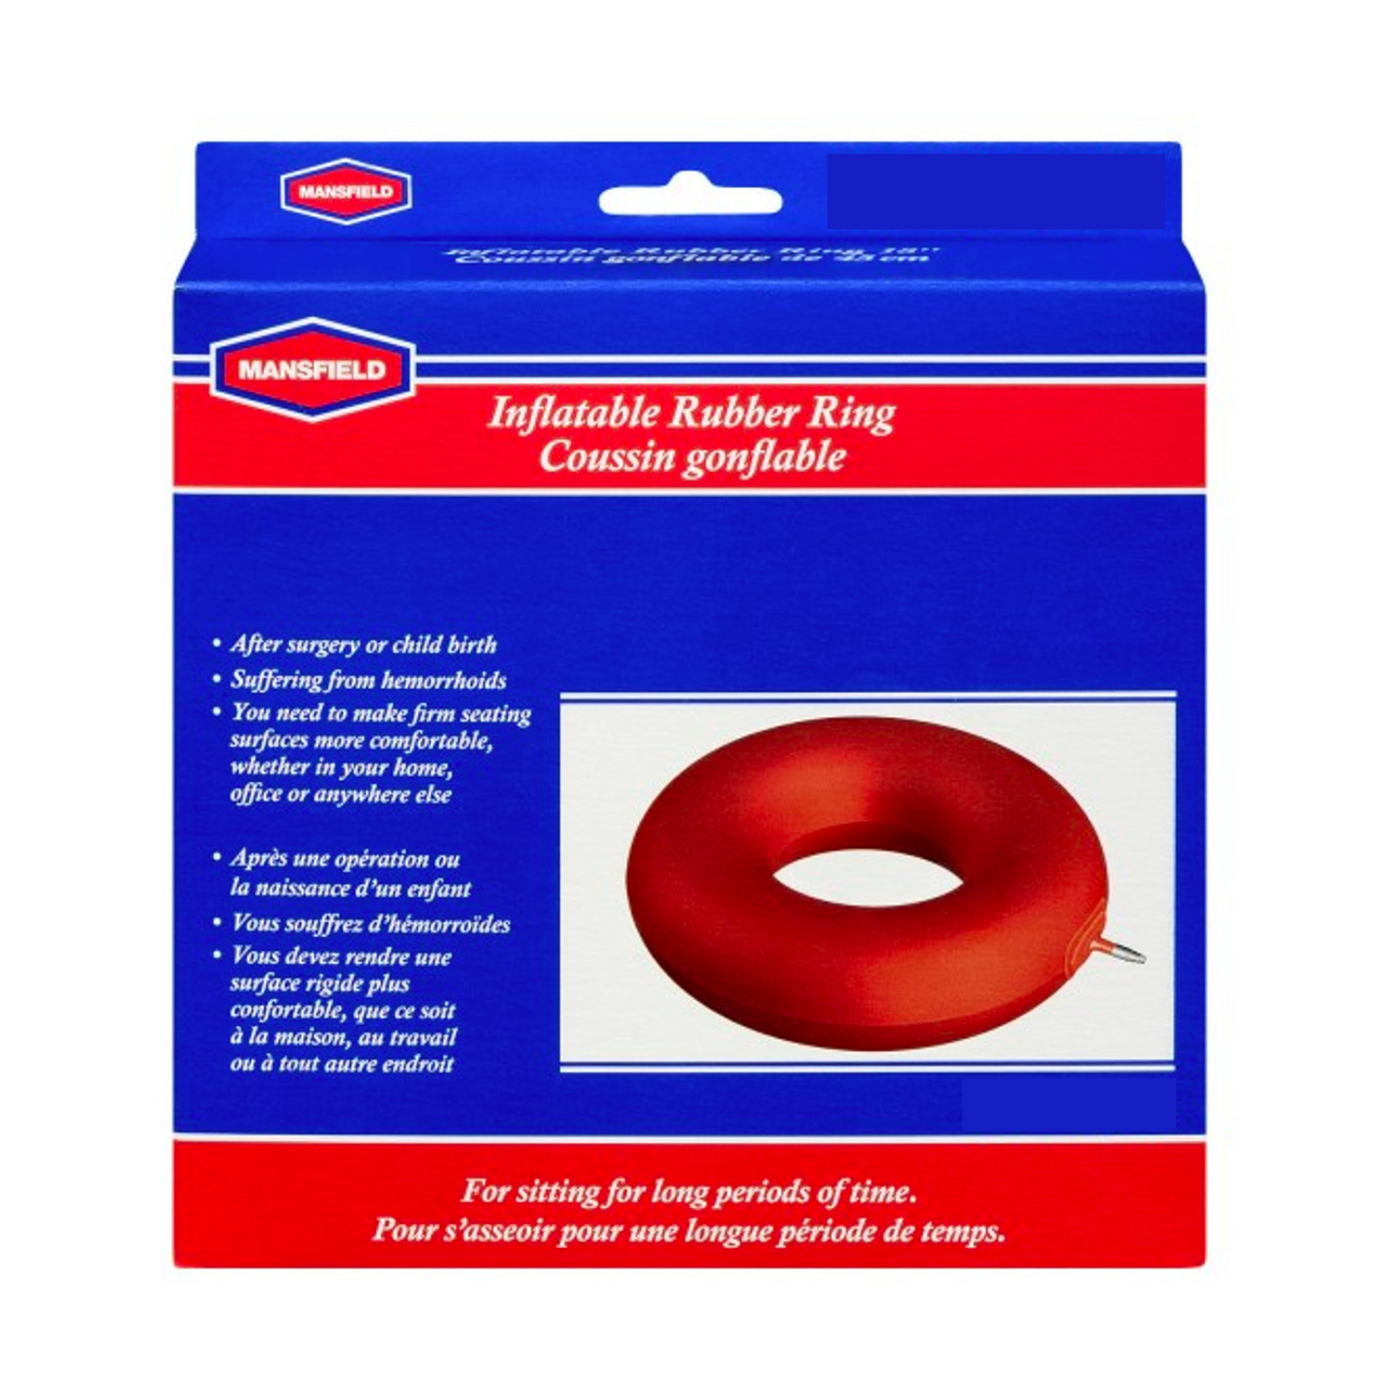 Mansfield Inflatable Ring Rubber 40cm (16in) Diameter